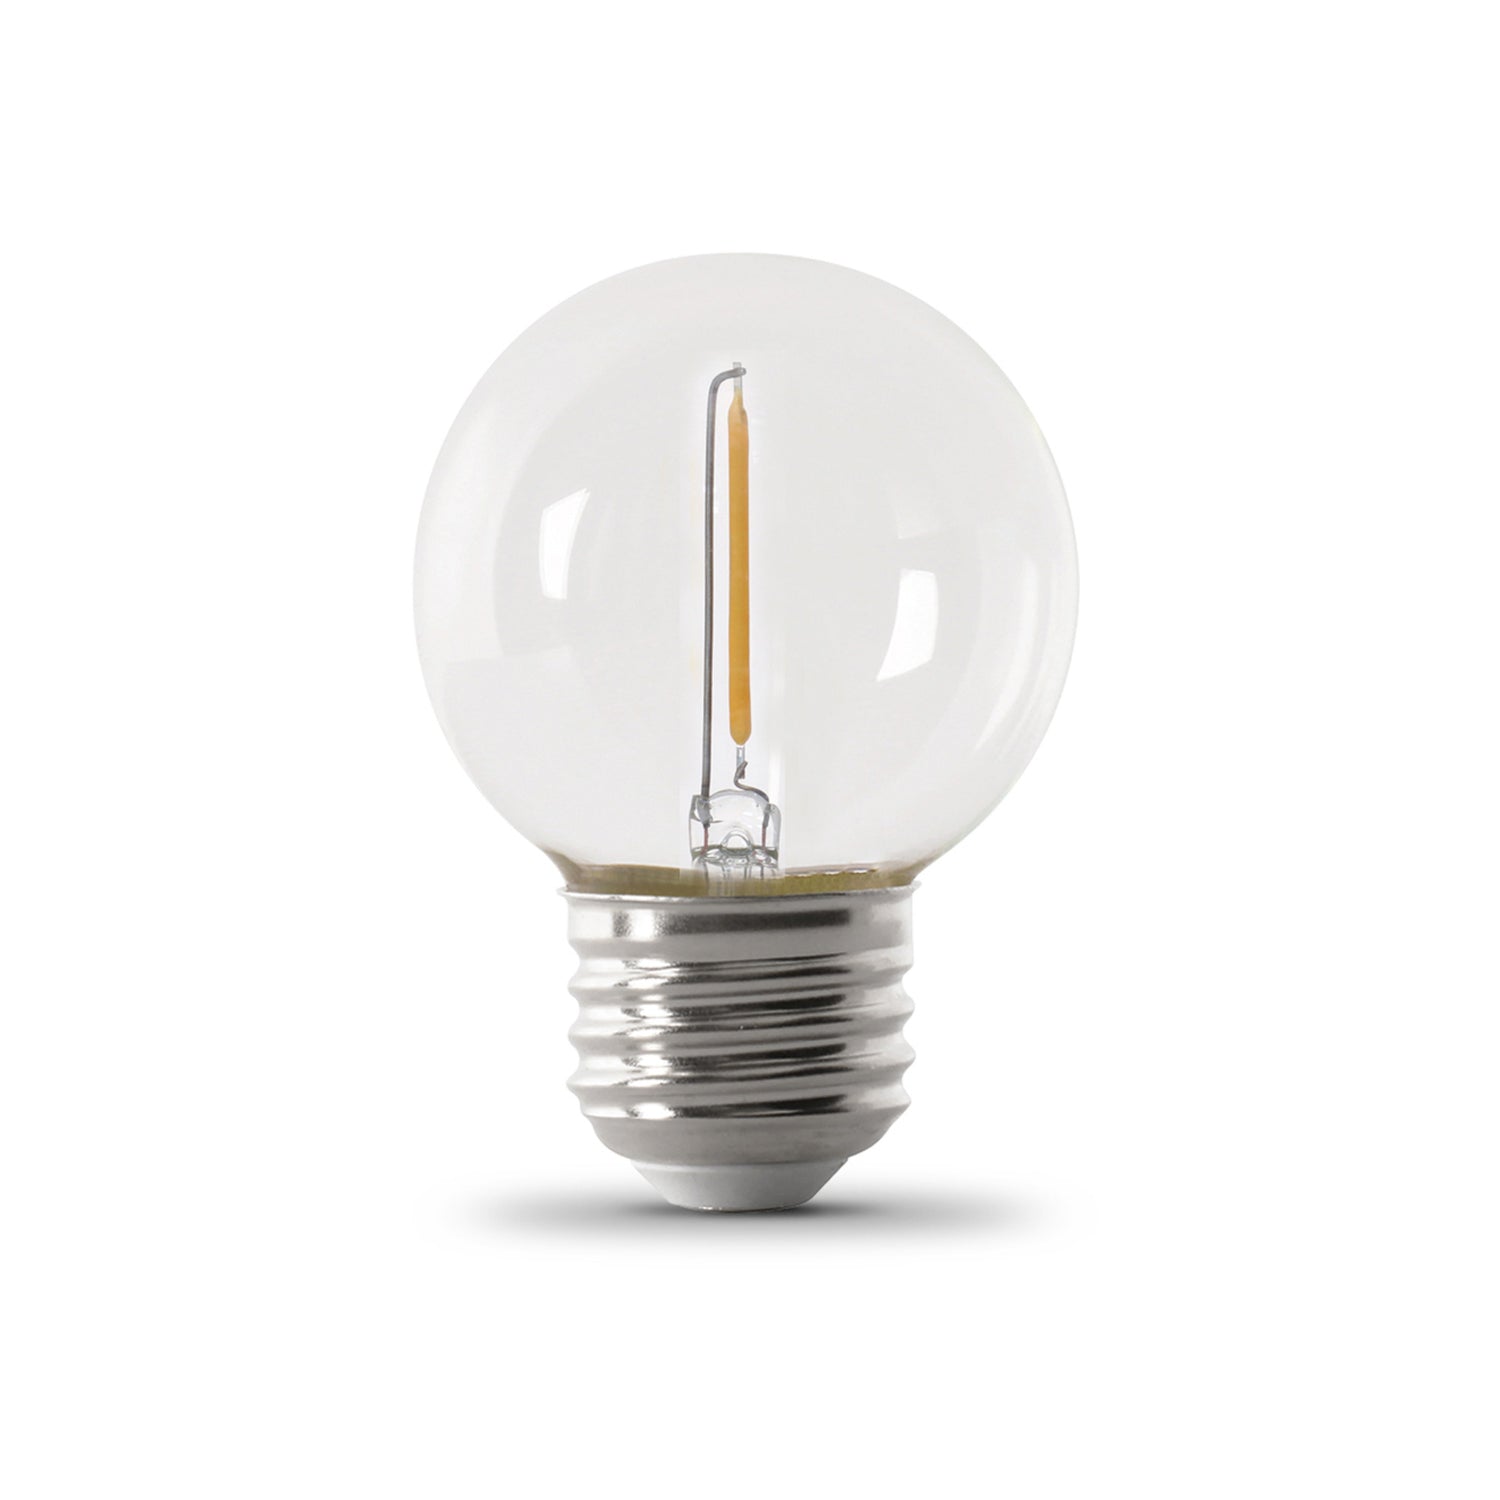 1W (11W Equivalent) Warm White (2200K) G16 ½ Candelabra Base (E26 Replacement) Globe String Light Replacement Bulb (4-Pack)